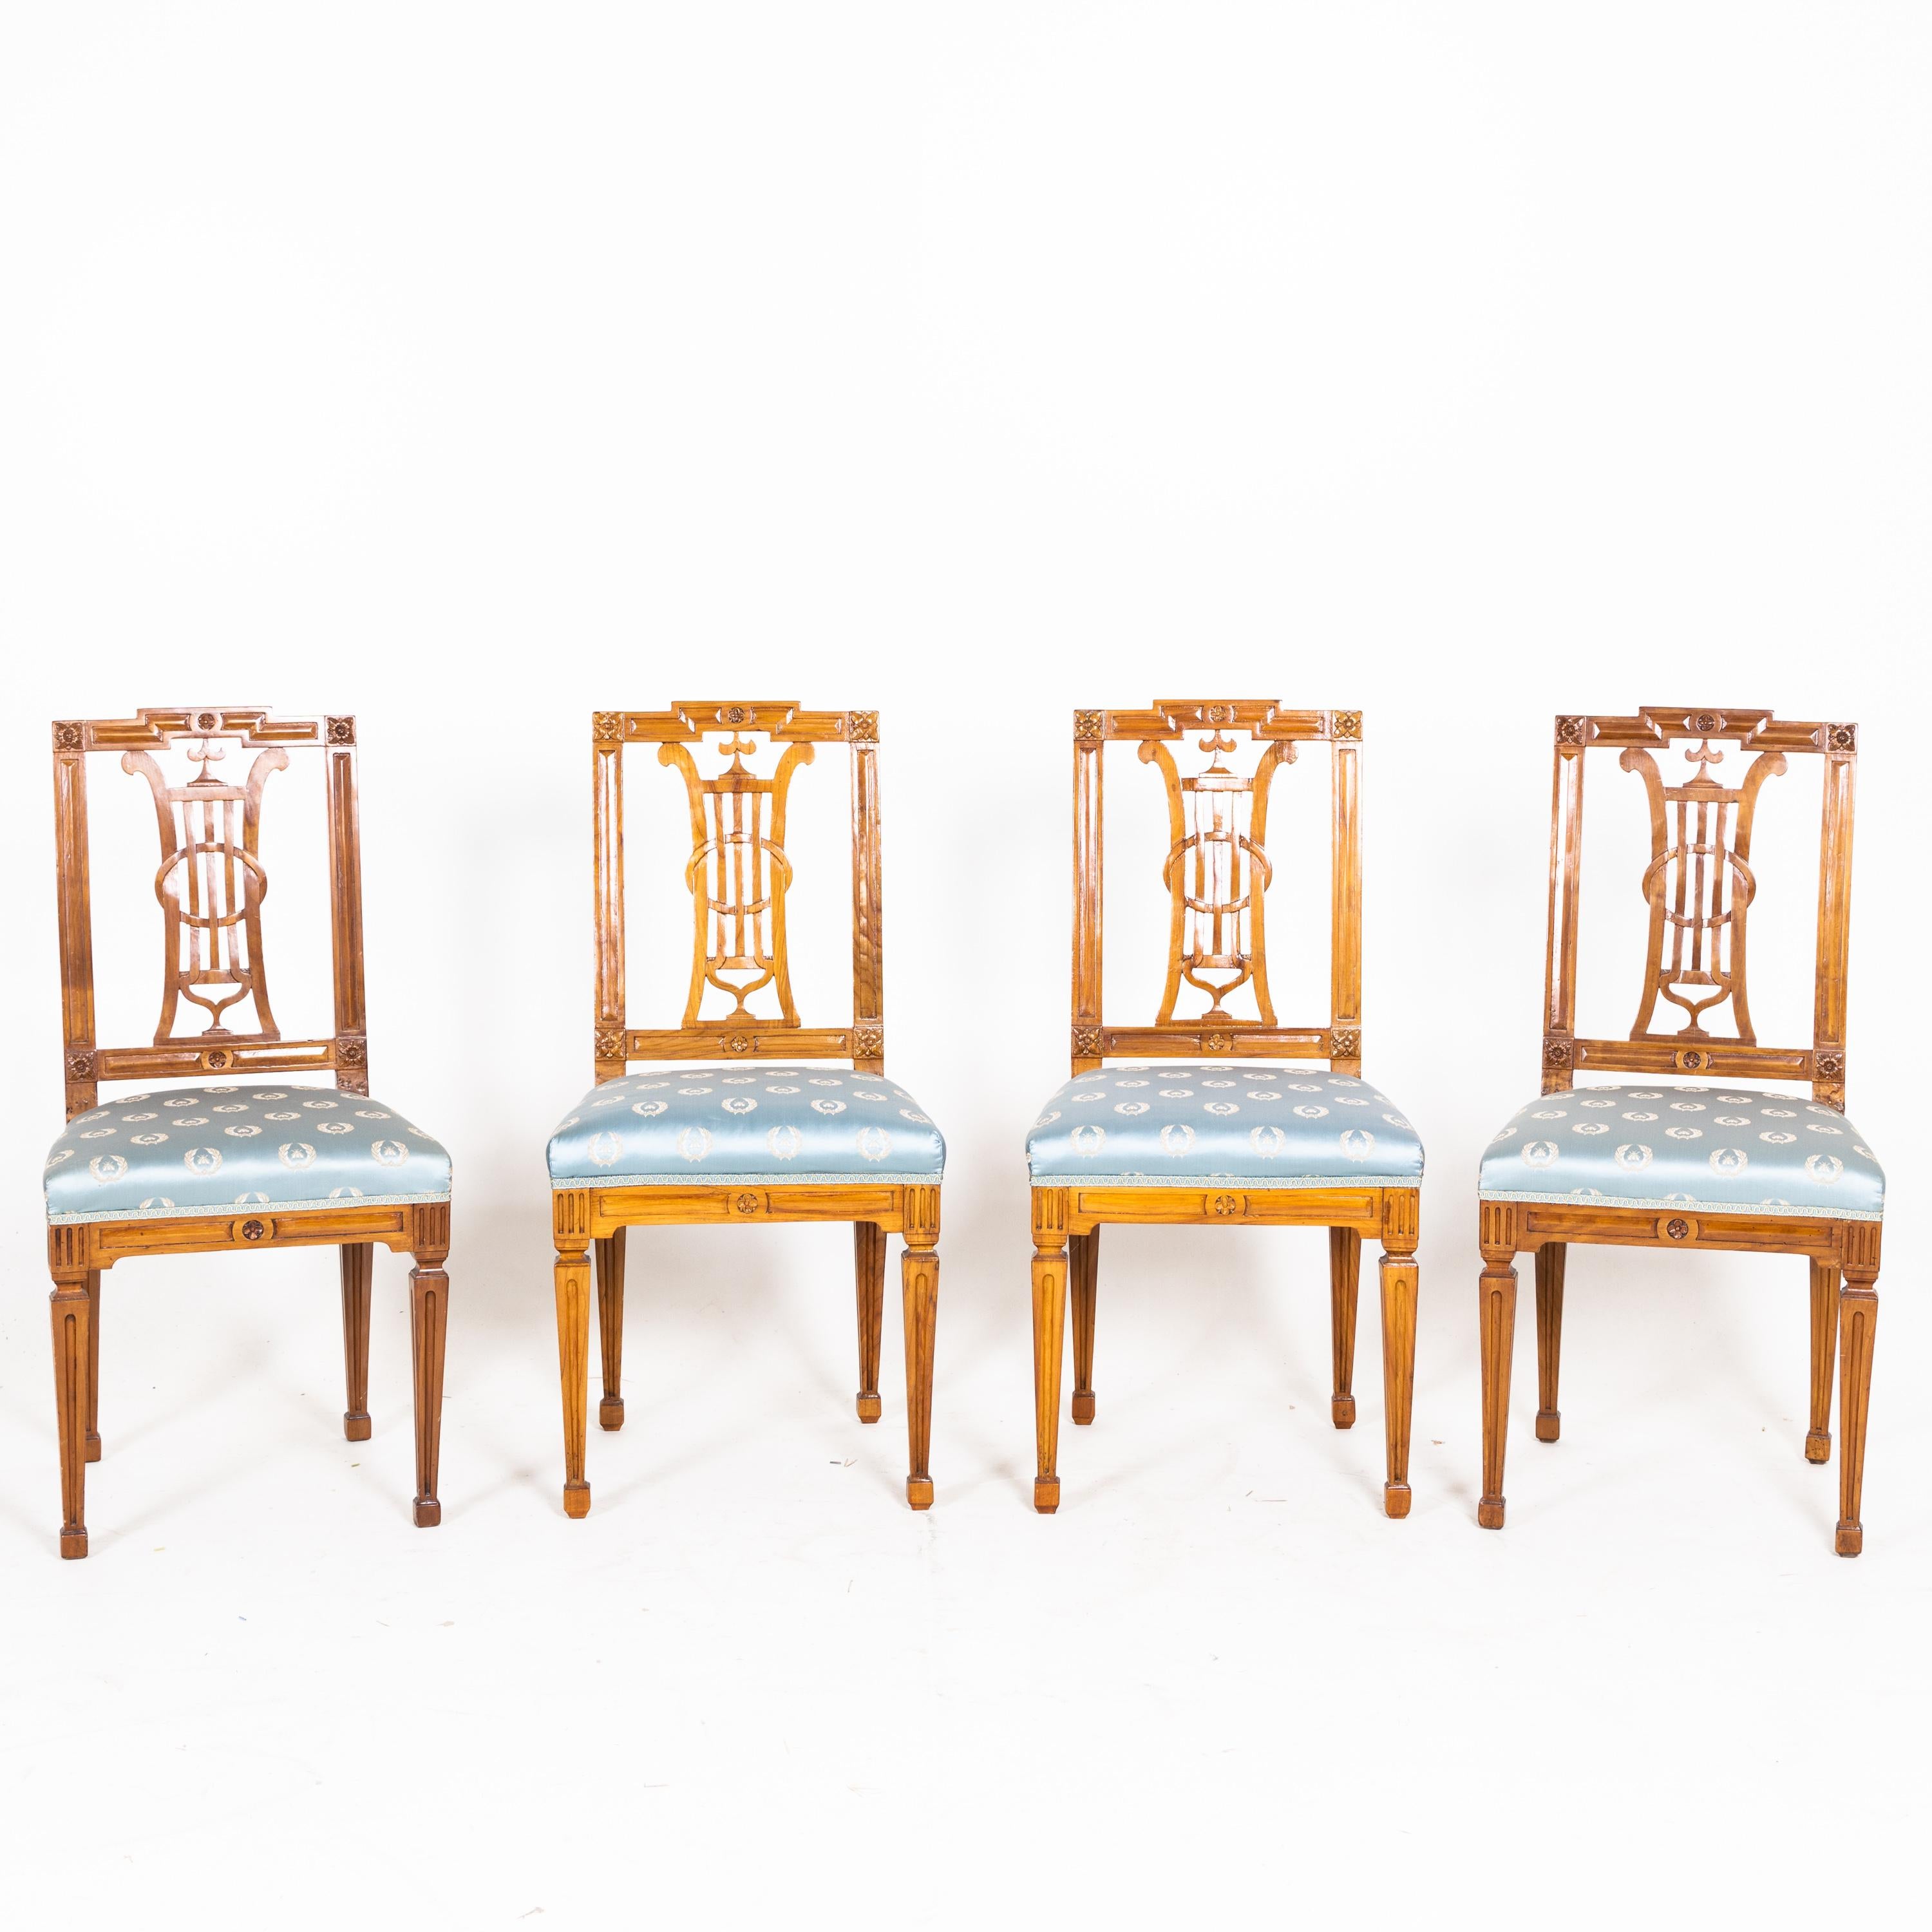 Set of four chairs on fluted tapered legs with carved frames and openwork backrests with harp ornaments. The seats are covered with light blue satin fabric with embroidered bee and laurel wreath decoration in gold. Carved solid cherry. Shown in: